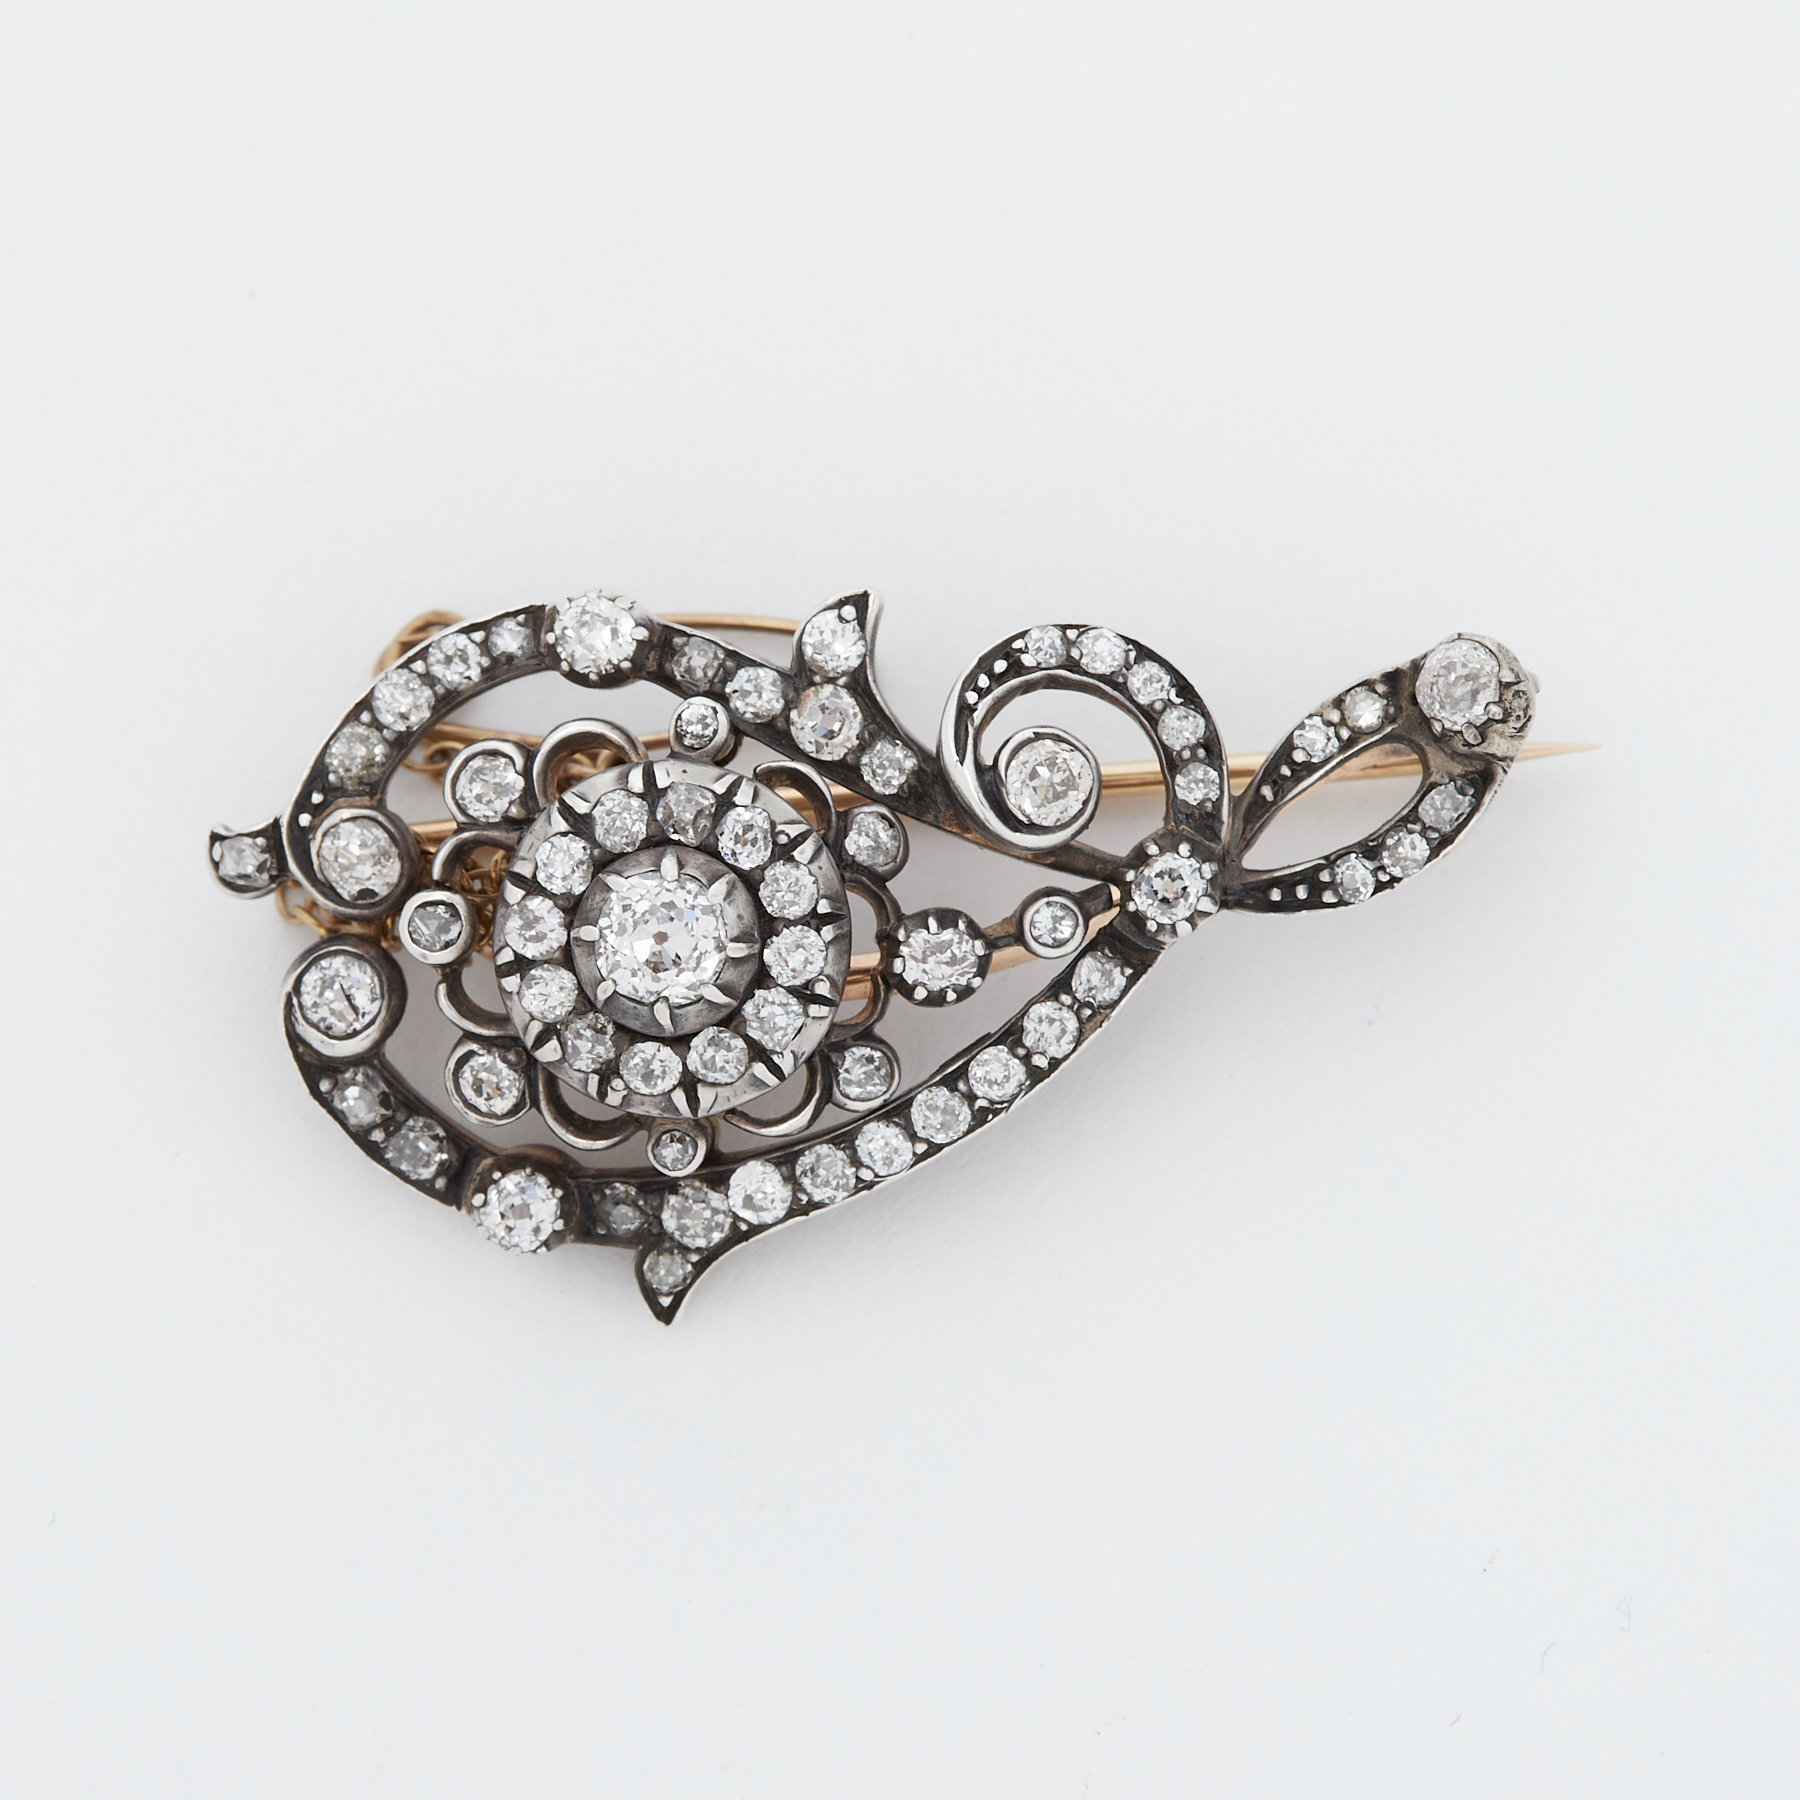 A Victorian 'scroll' design brooch set with old round cut diamonds, the largest diamond is approx.